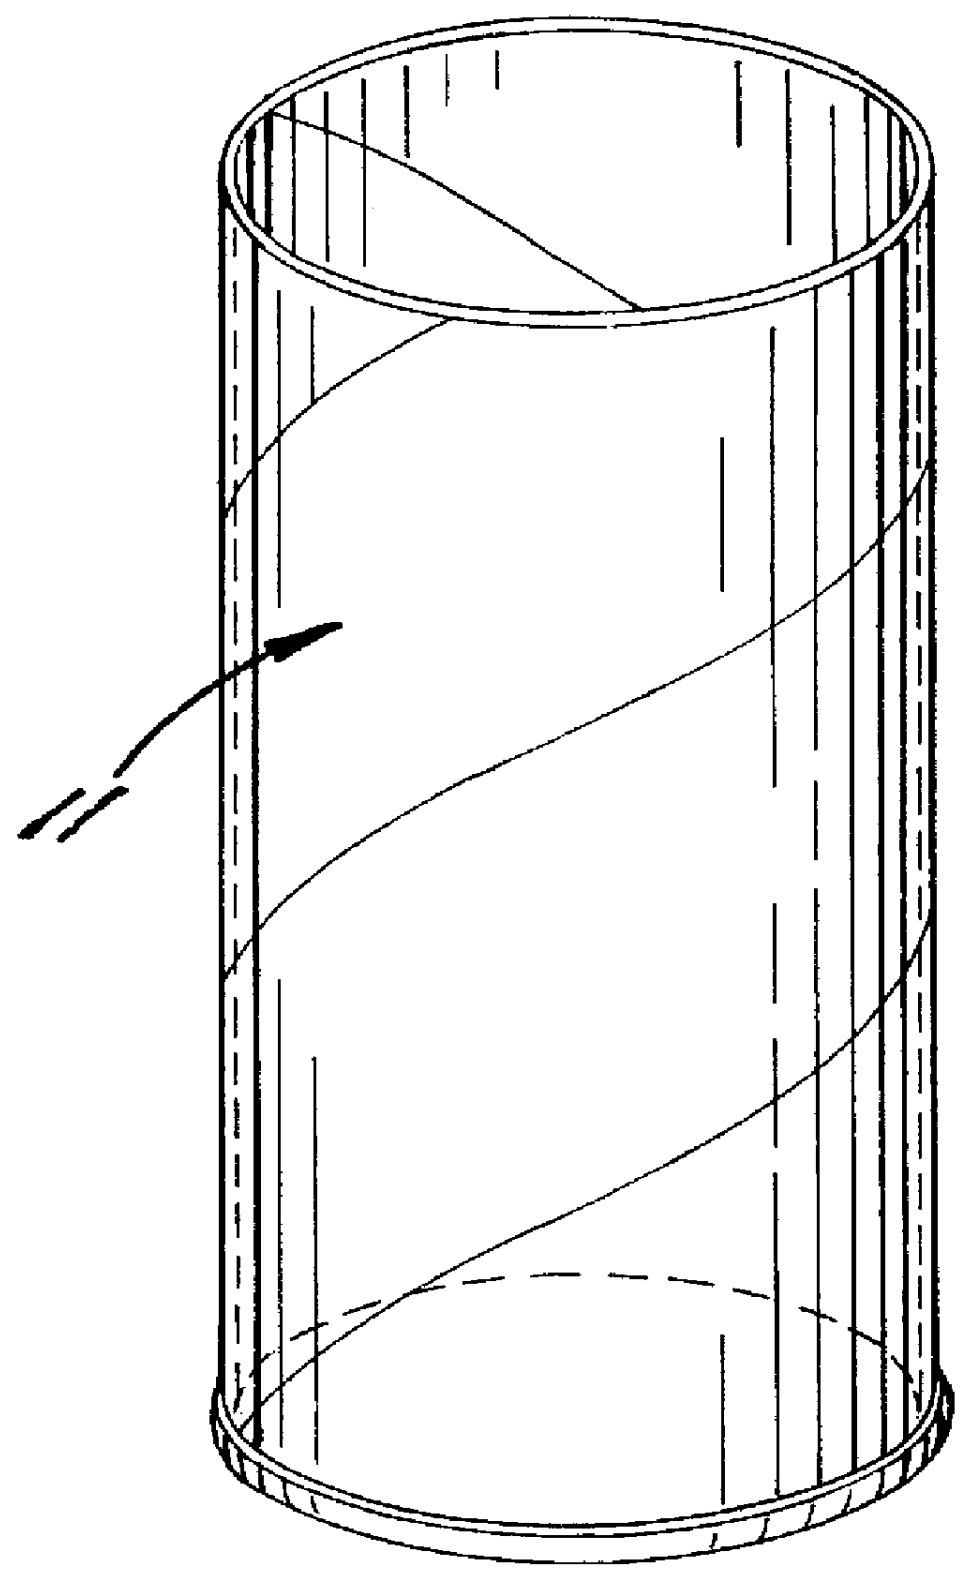 Process for closing and hermetically sealing a bottom of a container